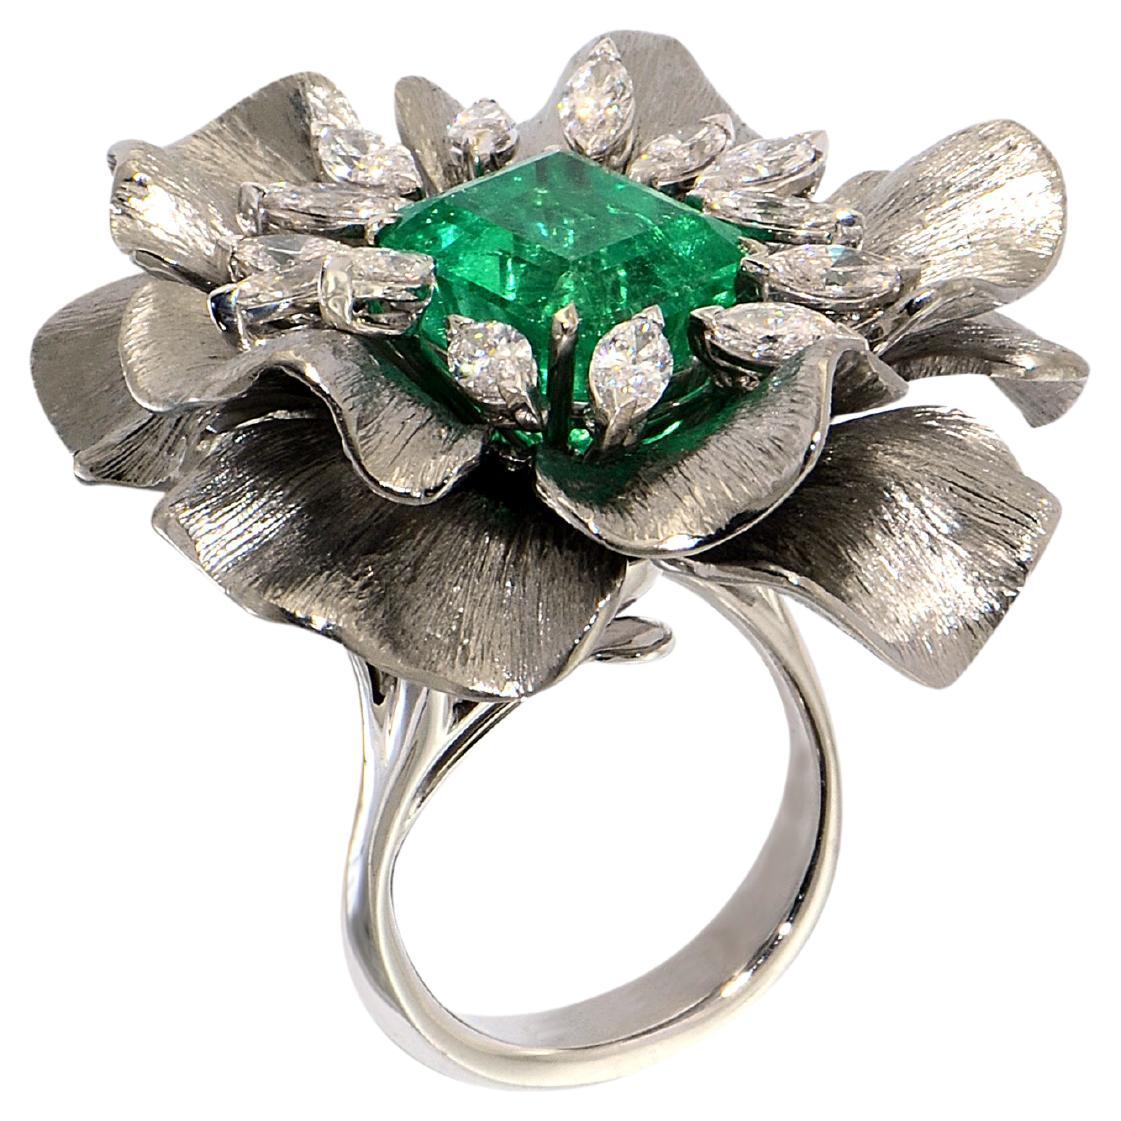 The very special, unique, Happy Flower ring is centering an impressive certificated emerald of 6.07 carats. Decorated by 14 navette cut diamonds of best quality.
Petals are handmade in natural light titanium, burin engraved designing an enchanting